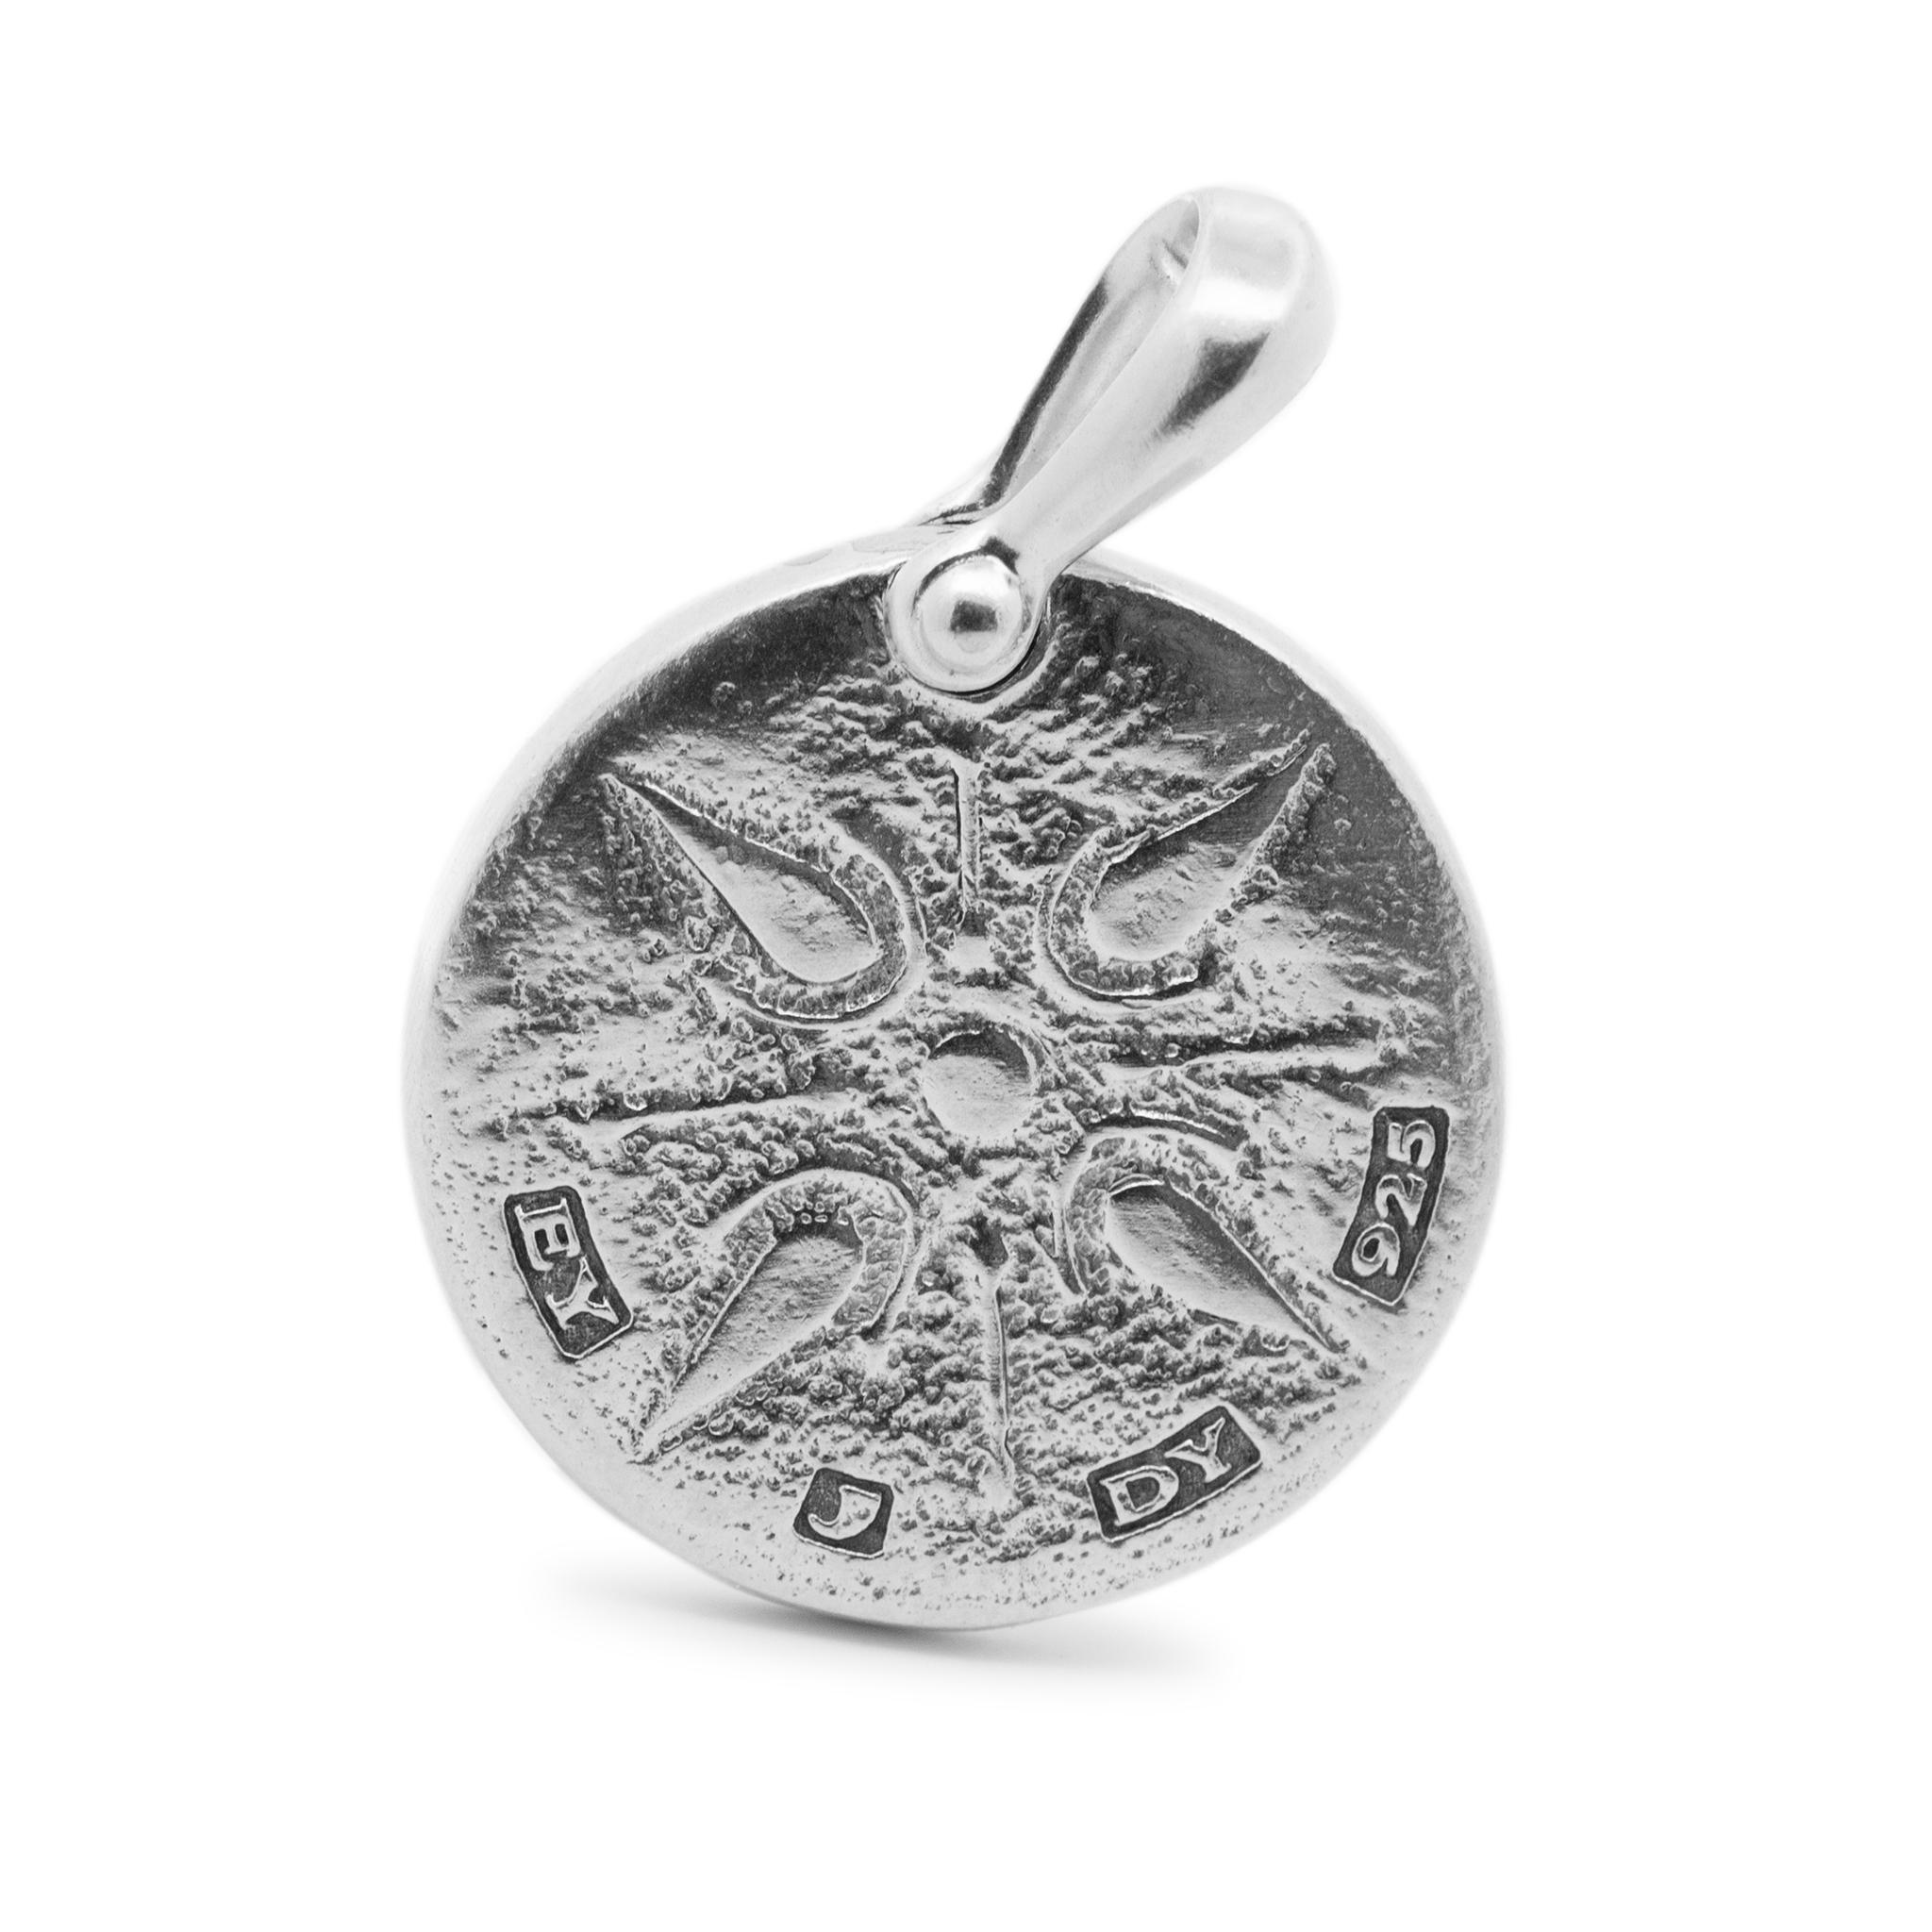 Brand: David Yurman

Gender: Ladies

Metal Type: 925 Sterling Silver

Length: 1.25 inches

Width: 3.68 mm 

Weight: 19.45 grams

Silver circle pendant. Engraved with 